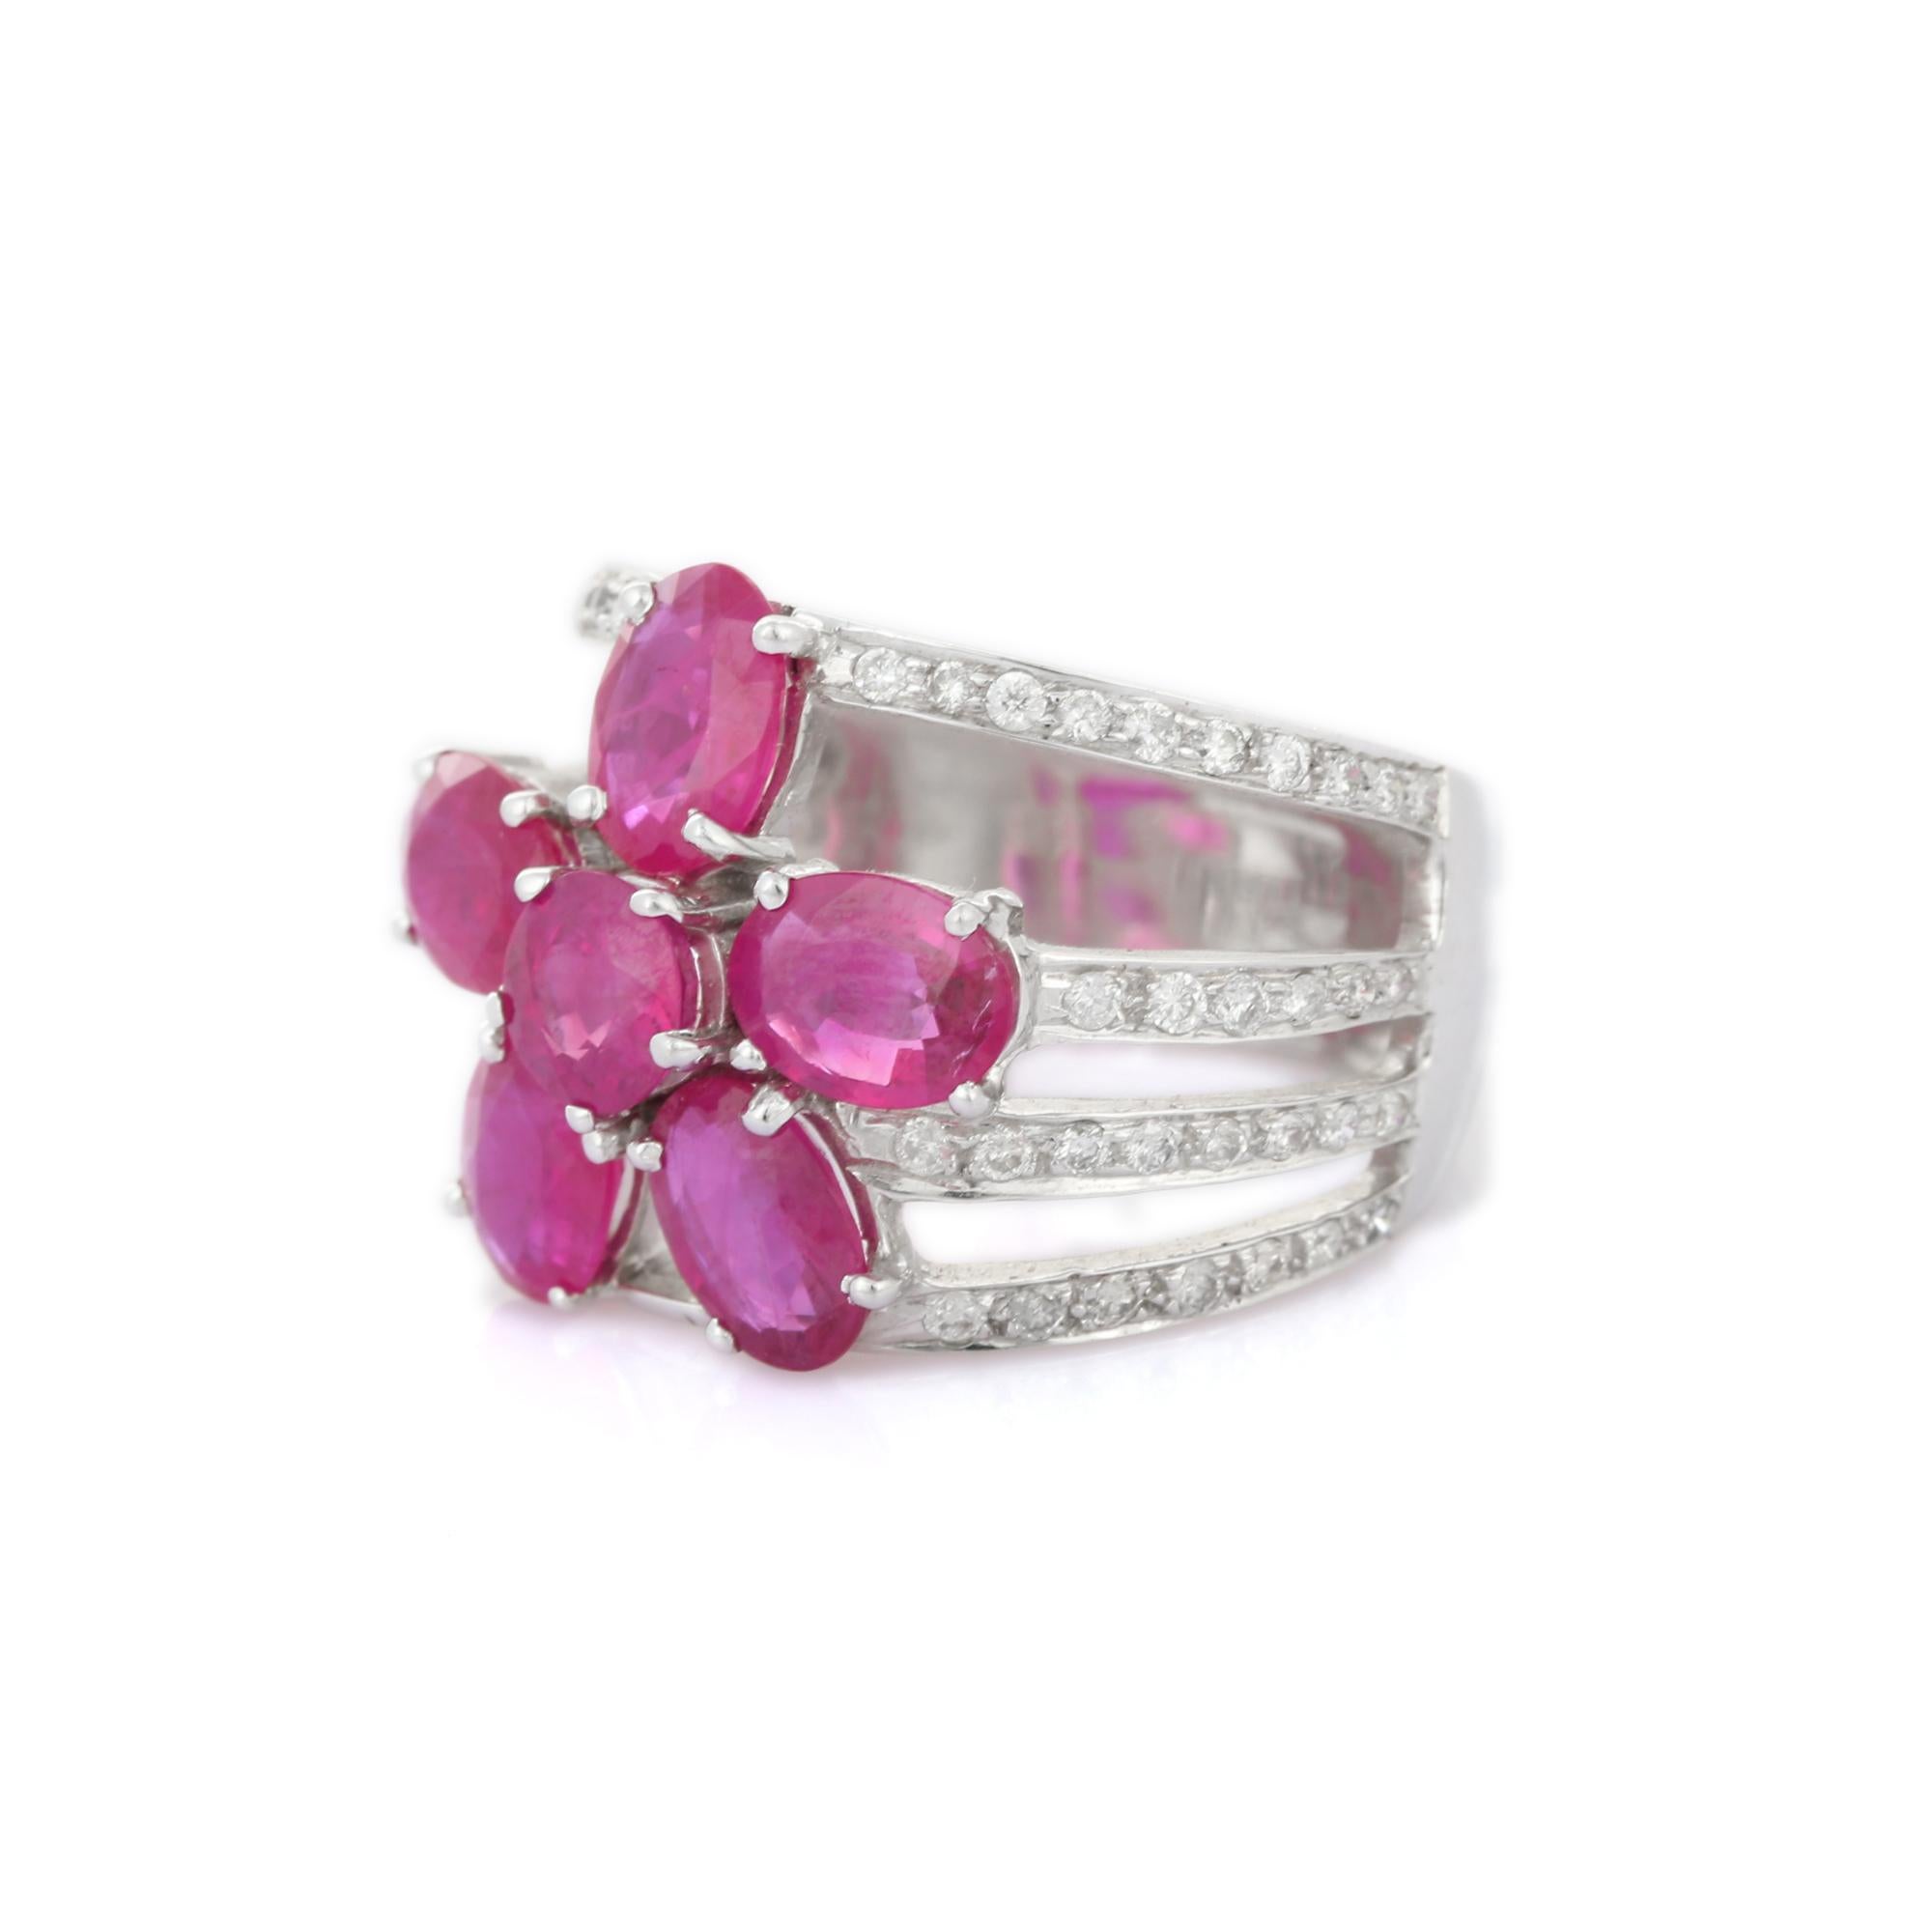 For Sale:  5.1 Ct Ruby Statement Flower Ring with Diamonds 18k Solid White Gold 4